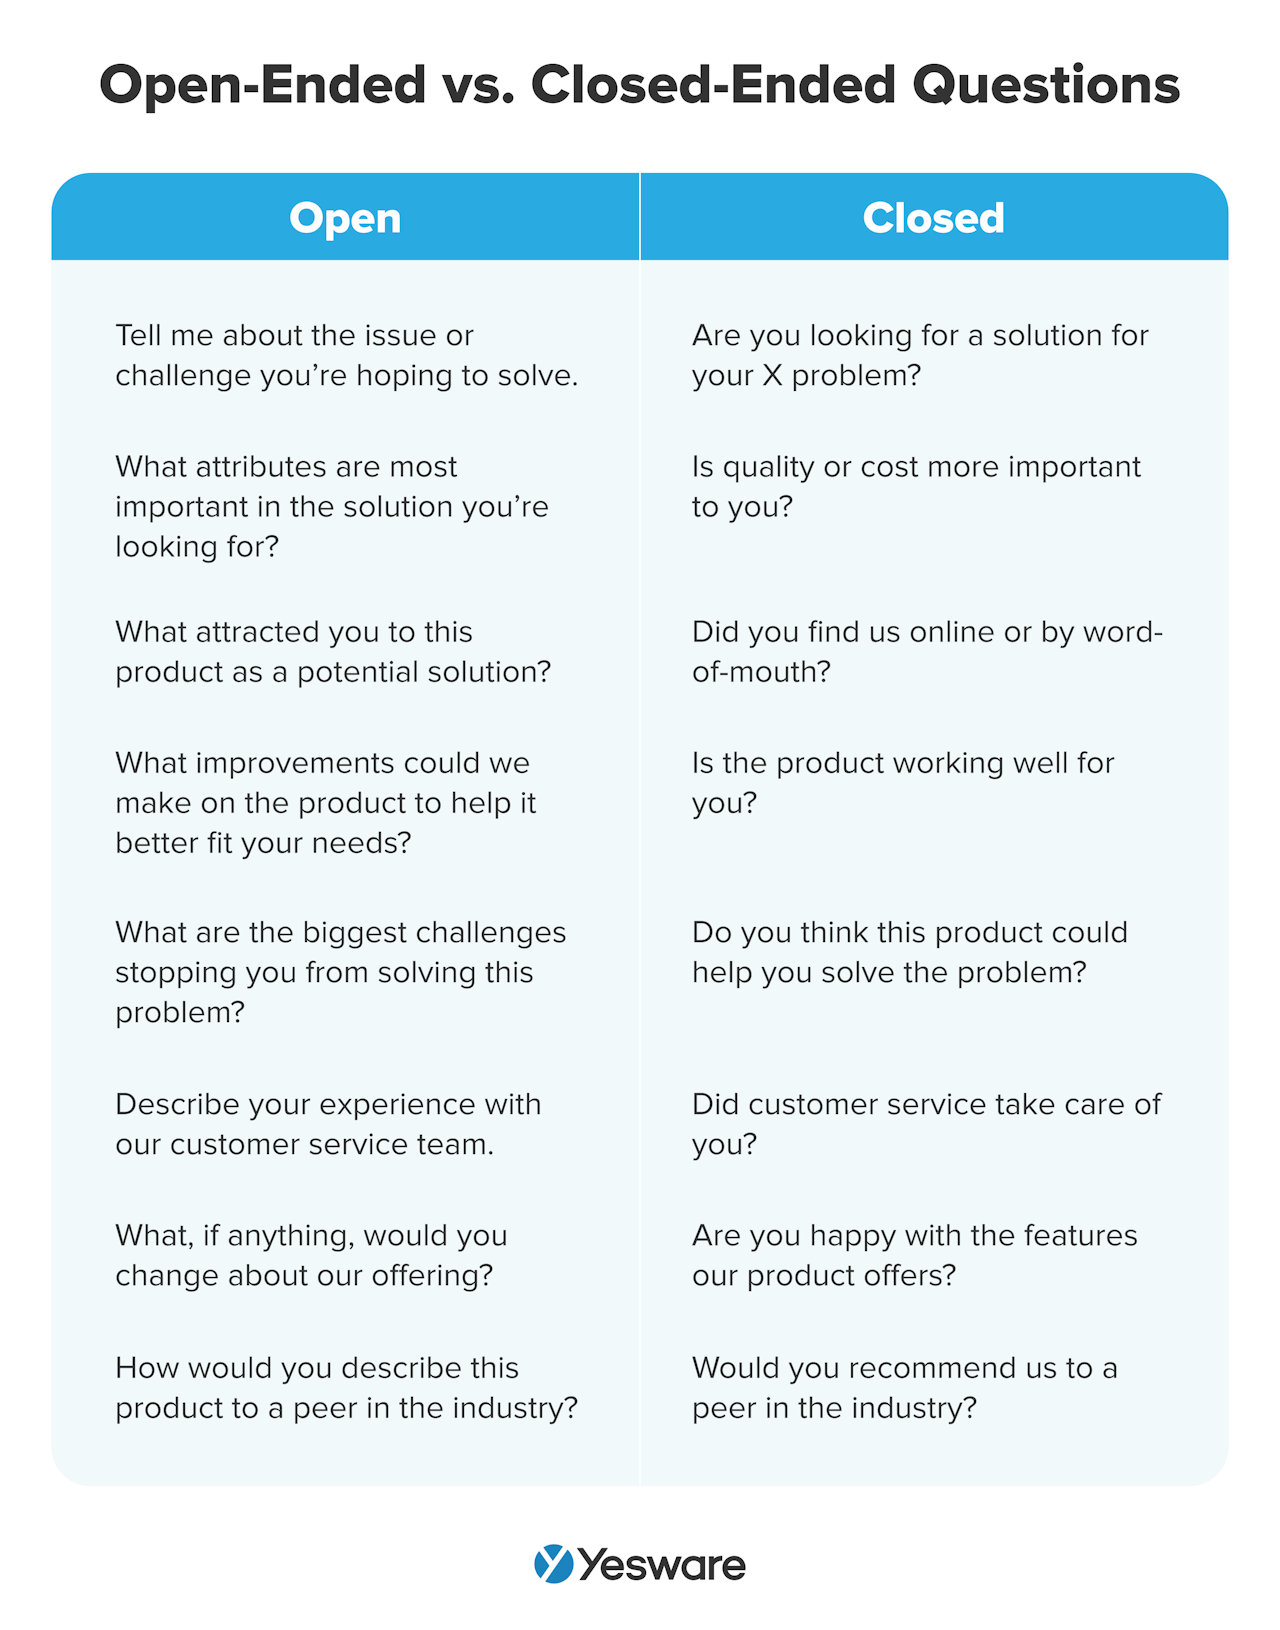 active listening skills: ask open-ended questions